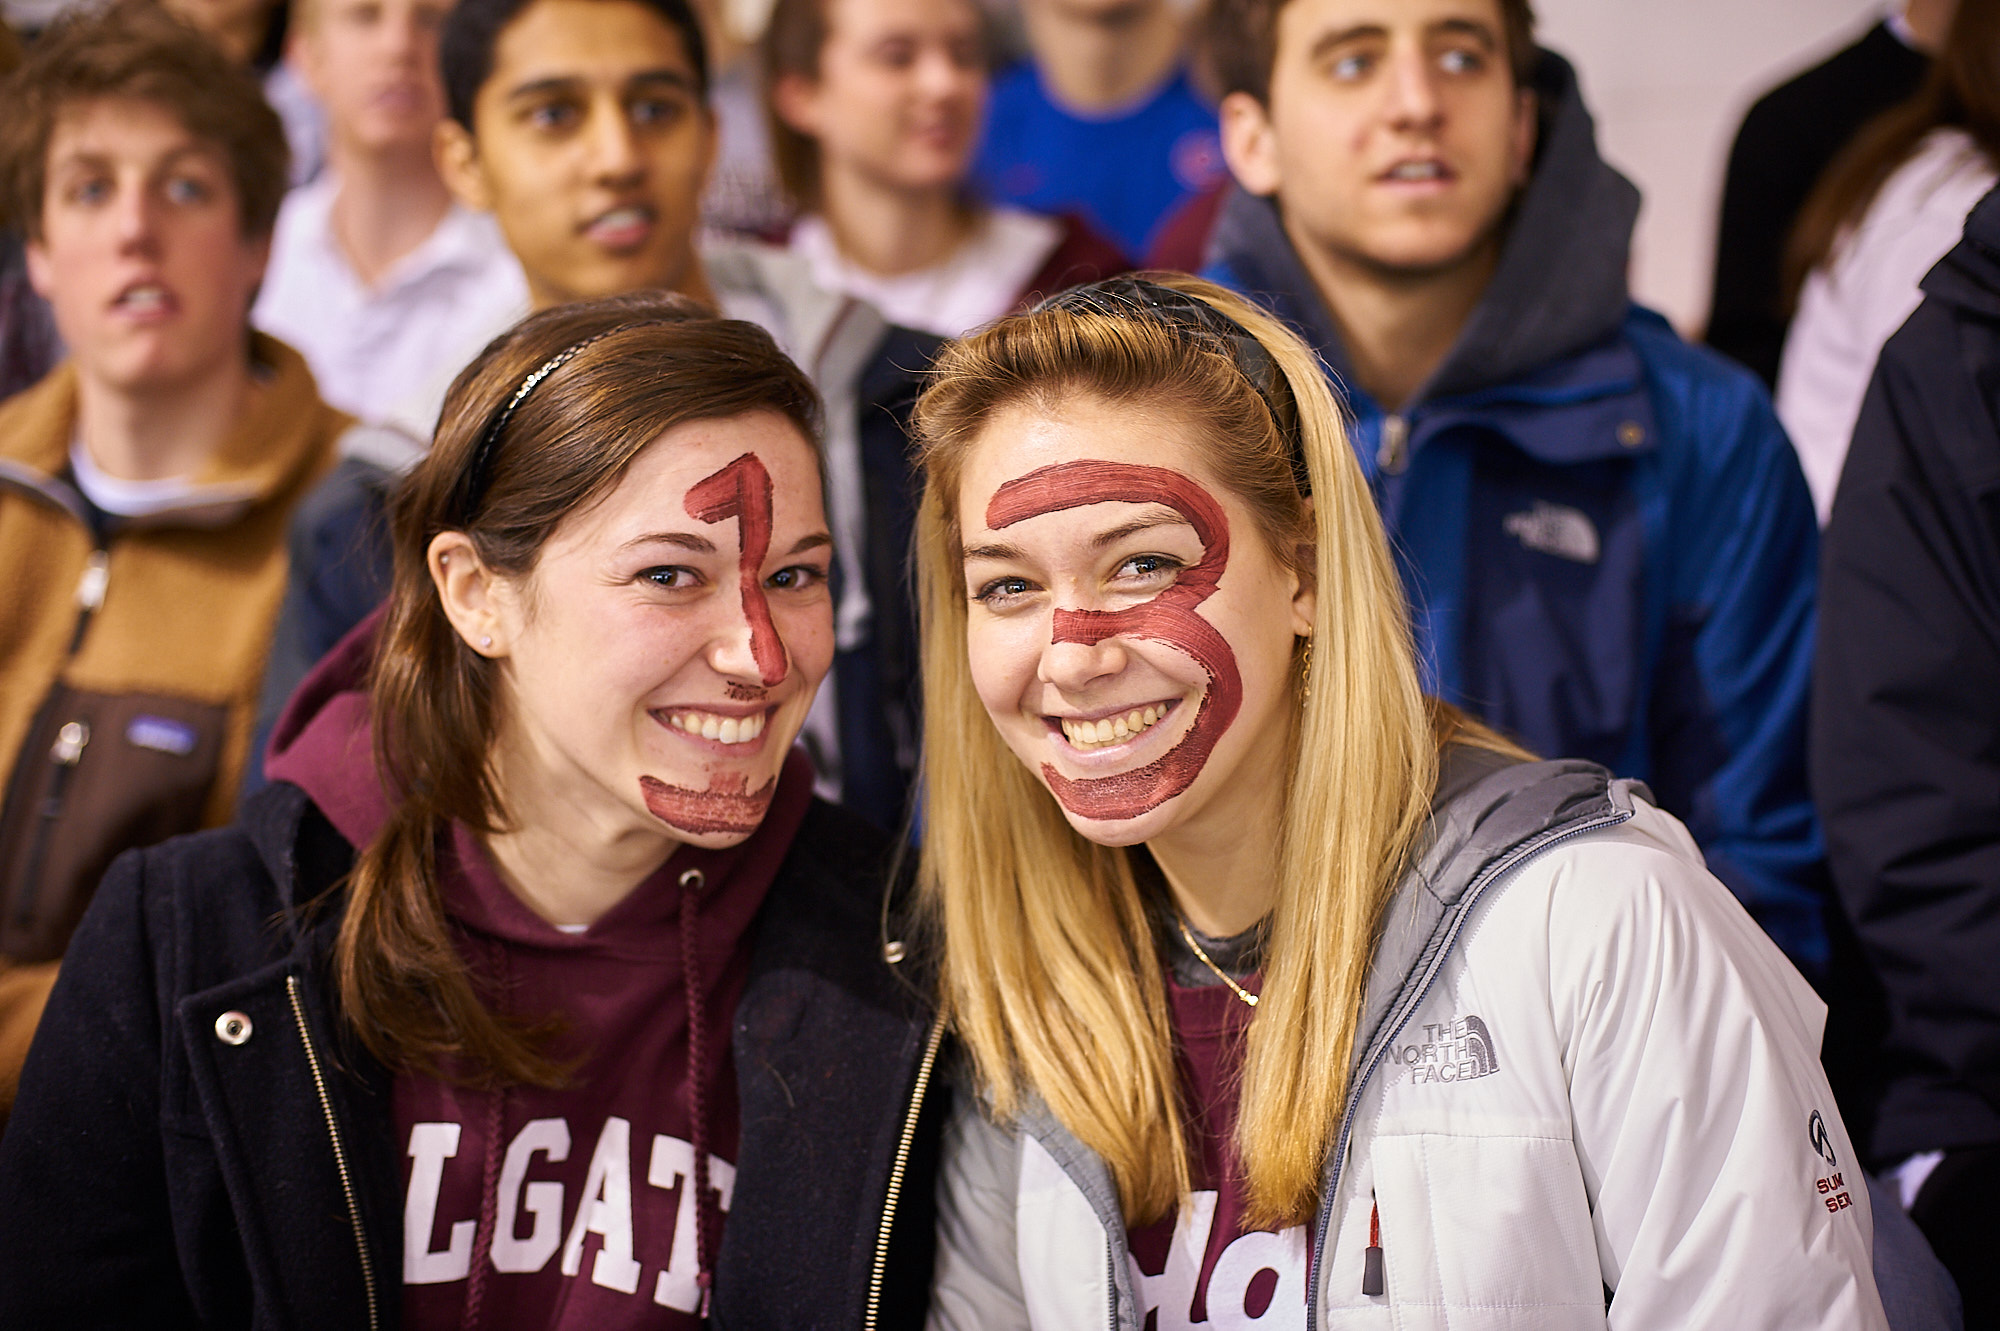 Student fans at a Colgate University Men's Ice Hockey game against rival Cornell University